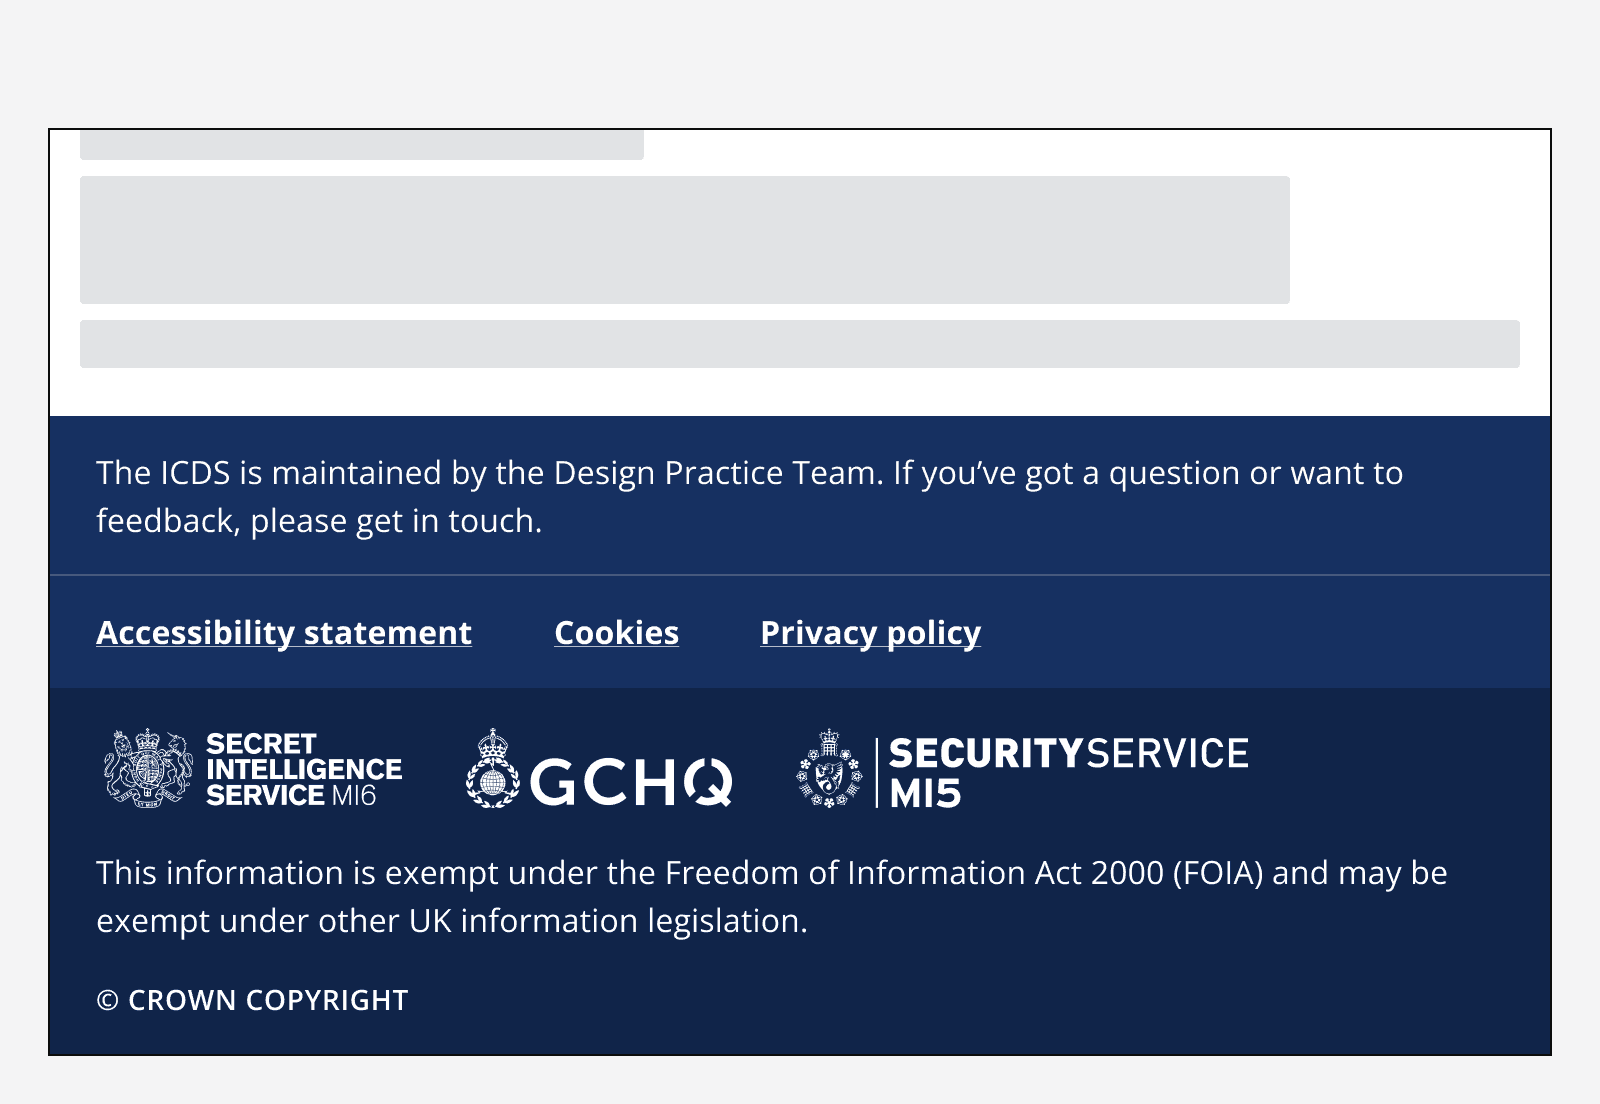 An image of a footer with two navigation groups titled ‘Services’ and ‘Policy’ which house a list of several standalone links. Every text element in the footer is white, including the hyperlinks.